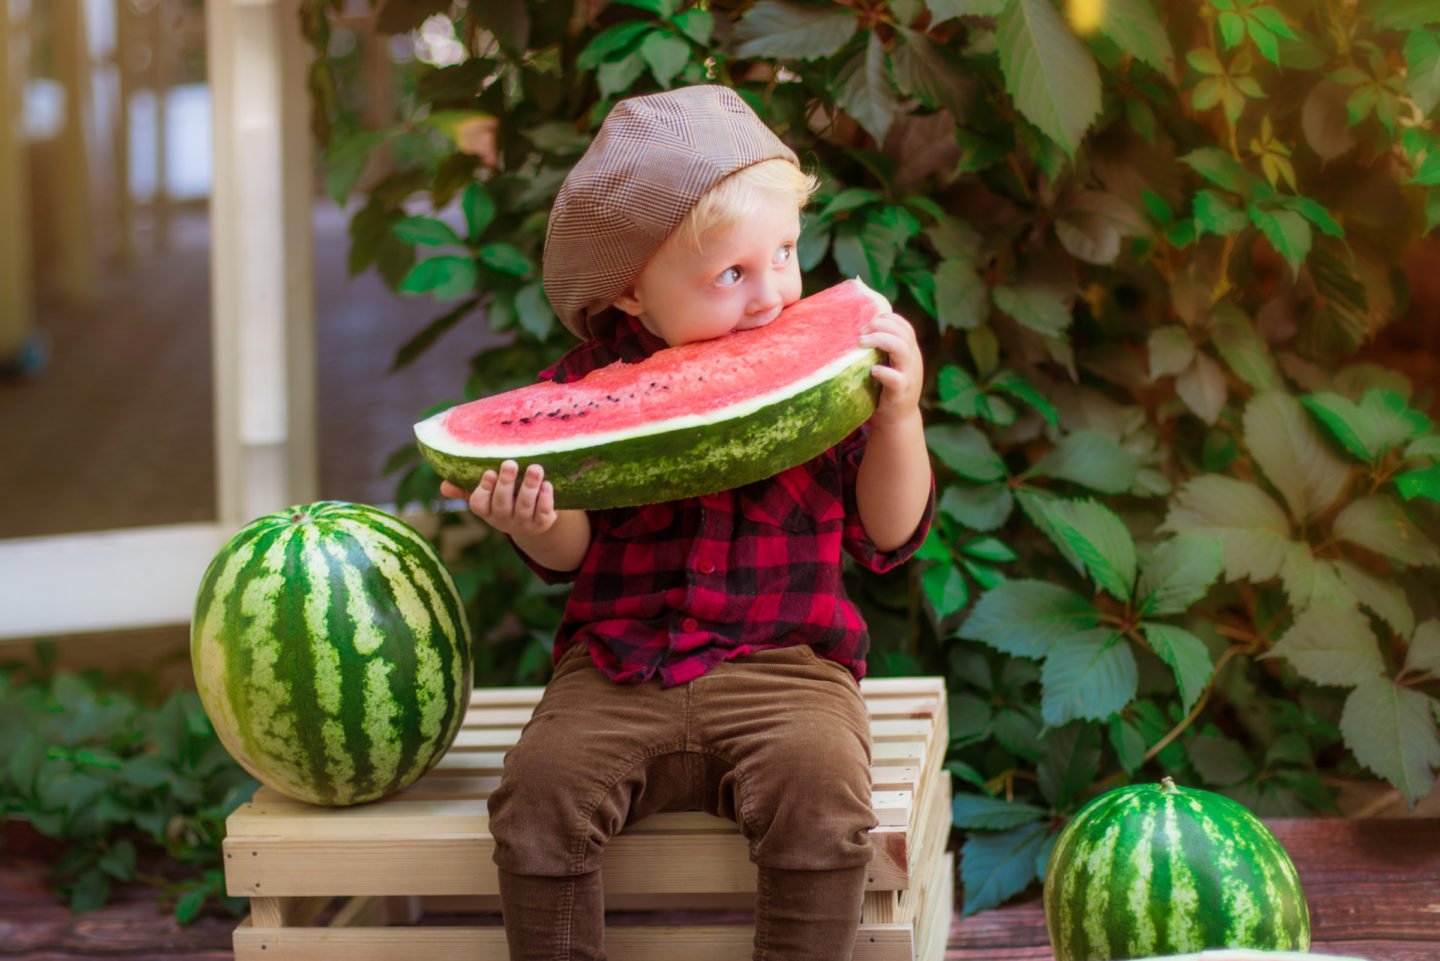 little boy eating a large watermelon slice